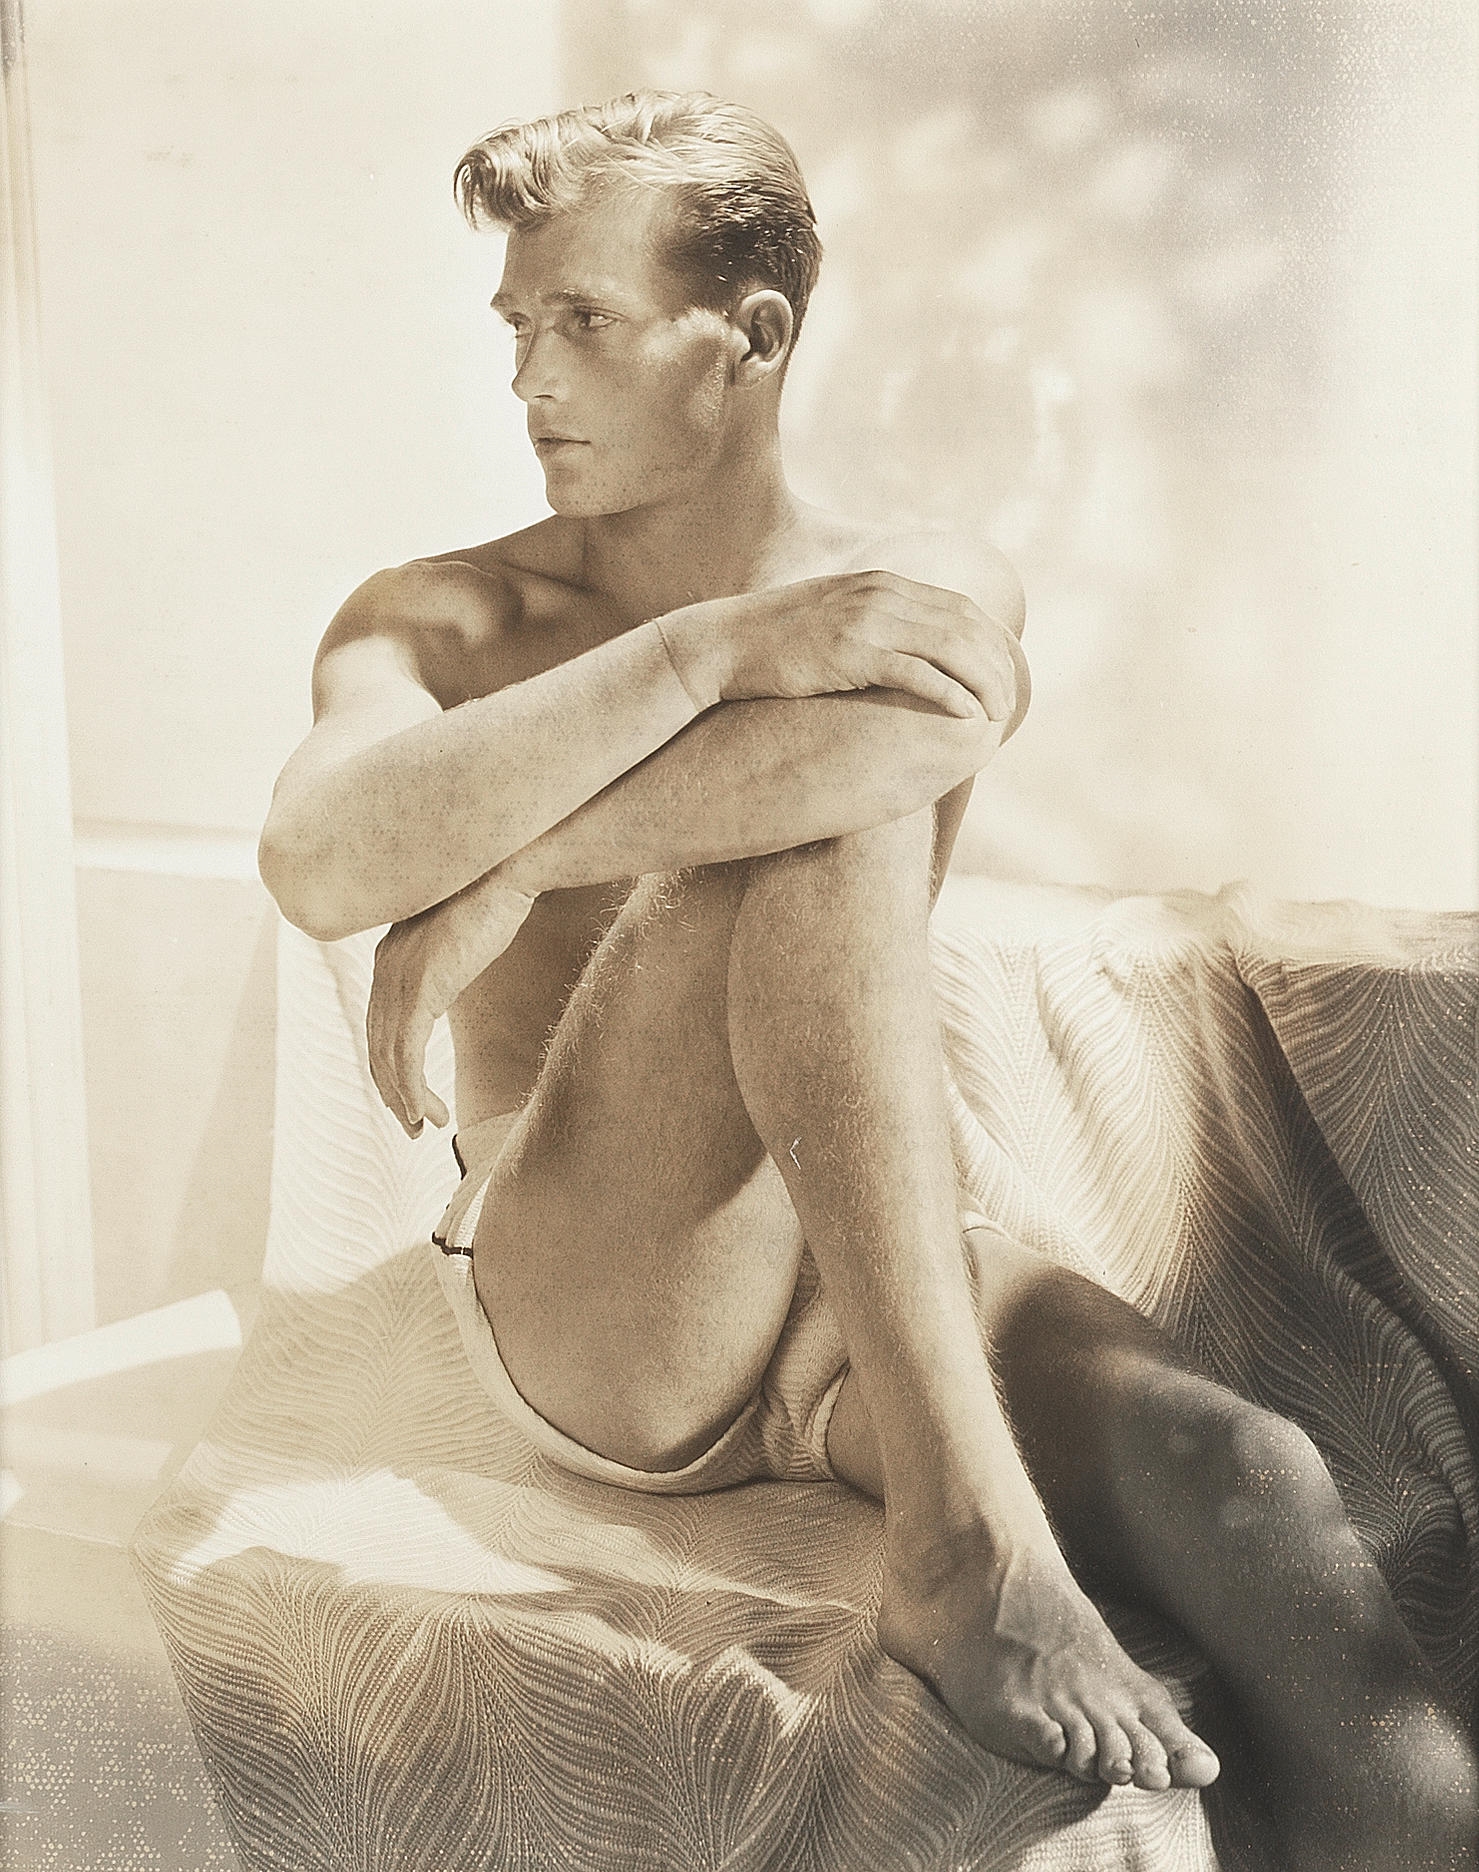 Portrait of a handsome man by Horst P. Horst, Executed circa 1940